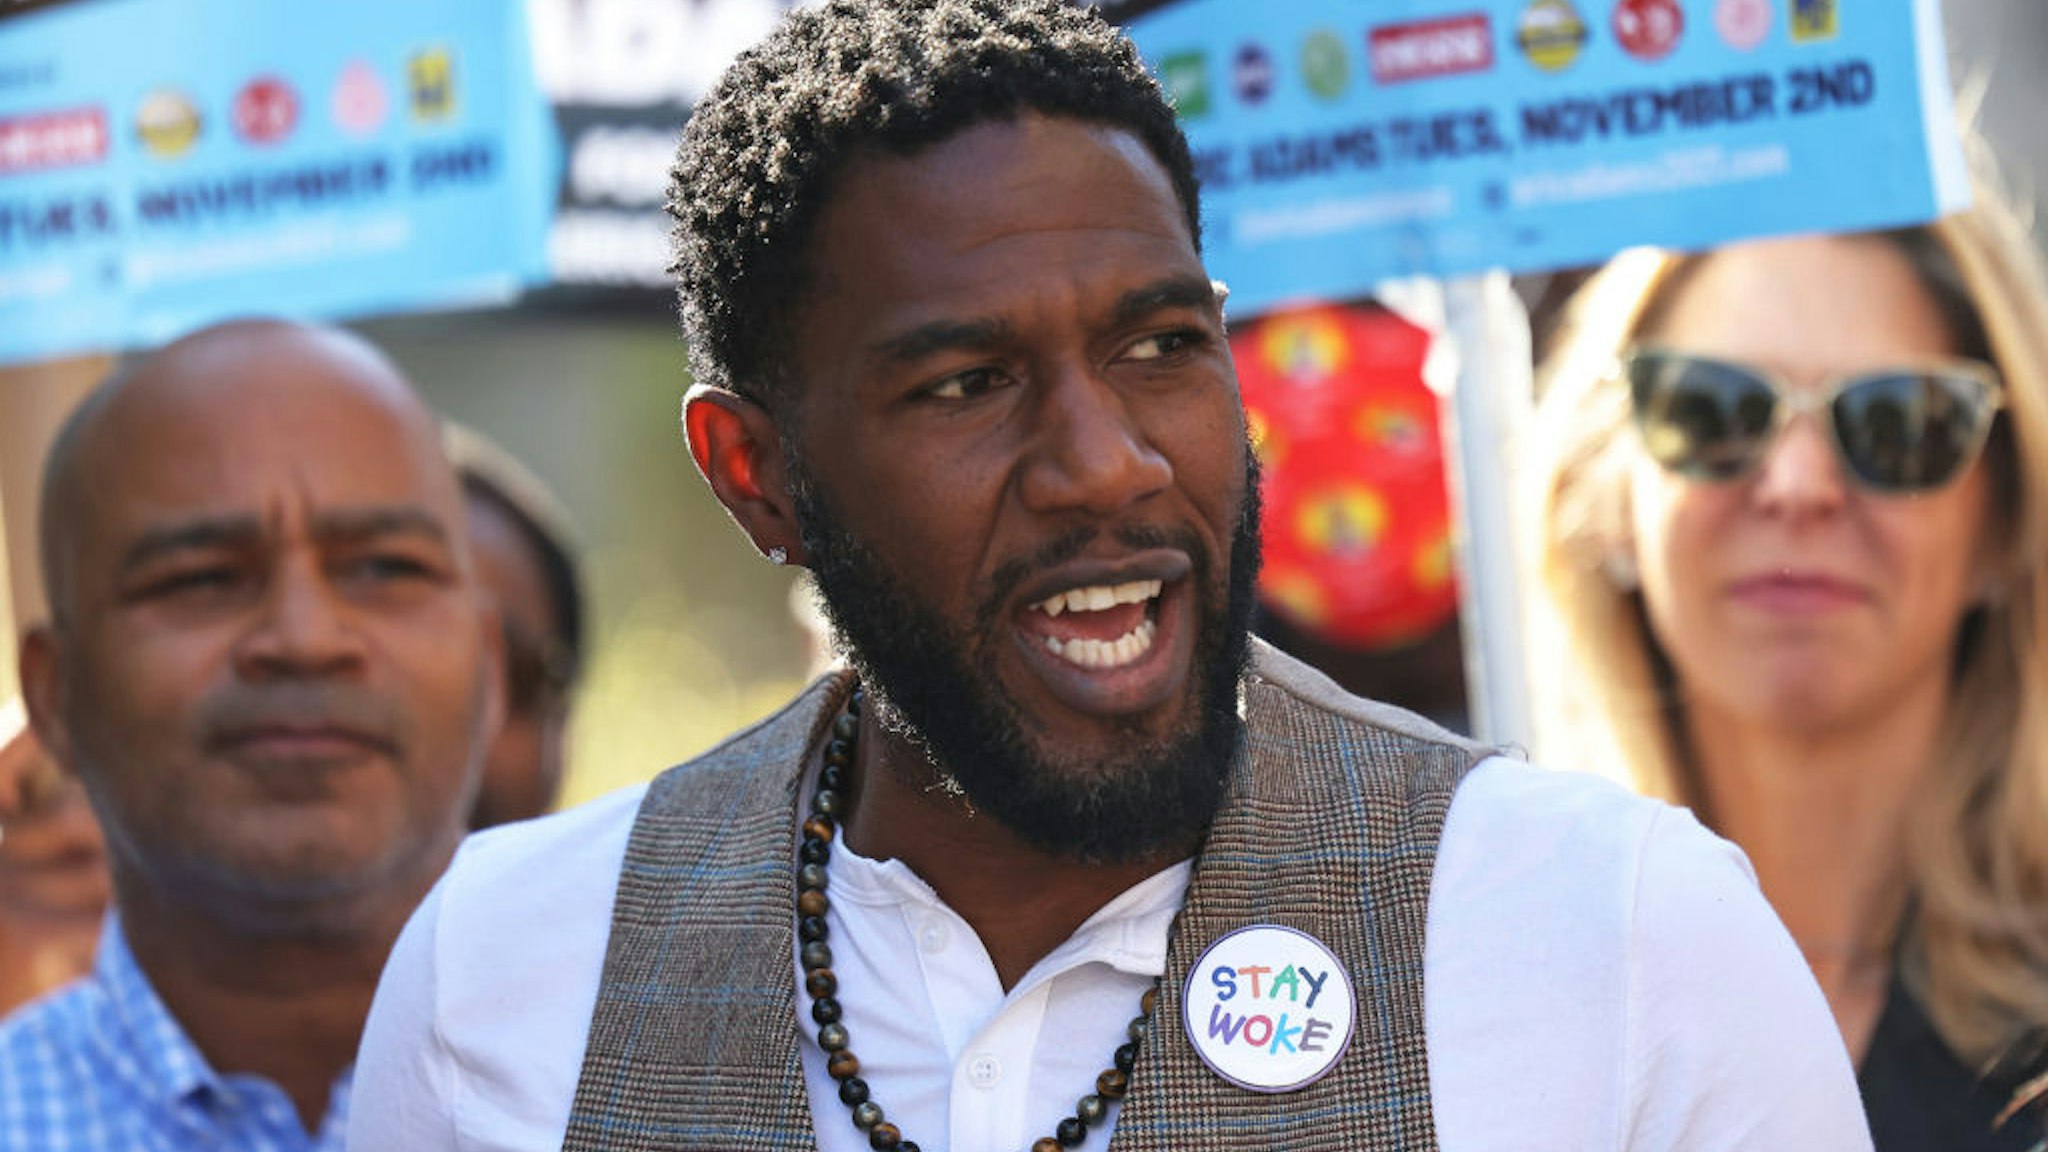 NEW YORK, NEW YORK - OCTOBER 22: New York City Public Advocate Jumaane Williams speaks during a Get Out the Vote (GOTV) rally in front of Brooklyn Borough Hall on October 22, 2021 in Downtown Brooklyn in New York City. Democratic NYC Mayoral candidate Eric Adams attended a GOTV event with Jumaane Williams, New York City Public Advocate, and NYC Comptroller candidate Brad Lander on the eve of early voting in NYC. The event comes two days after Adams faced off in the first mayoral debate with Republican Mayoral candidate Curtis Sliwa.